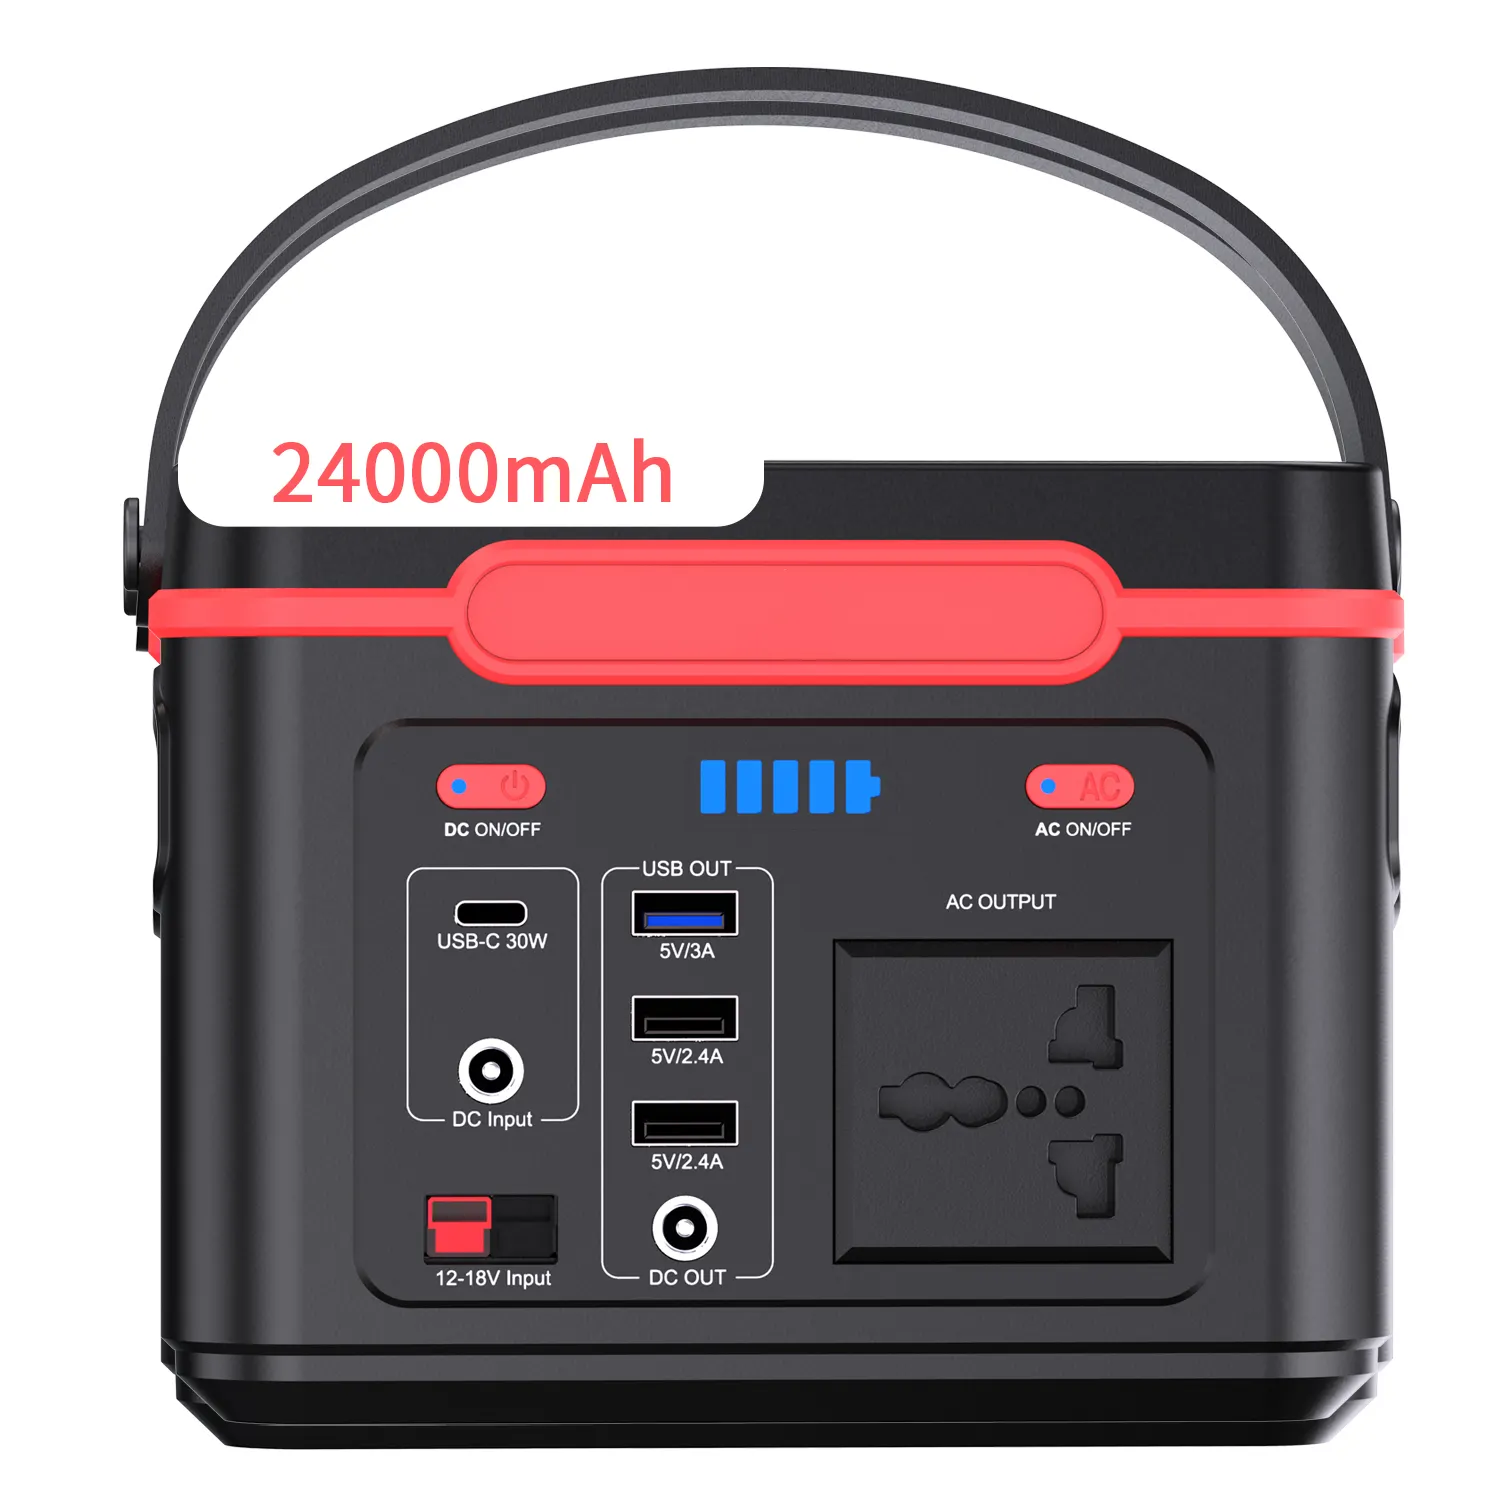 New Outdoor Mobile Portable Rechargeable High-power Energy Storage Power Home Battery Station Large Capacity Emergency Power